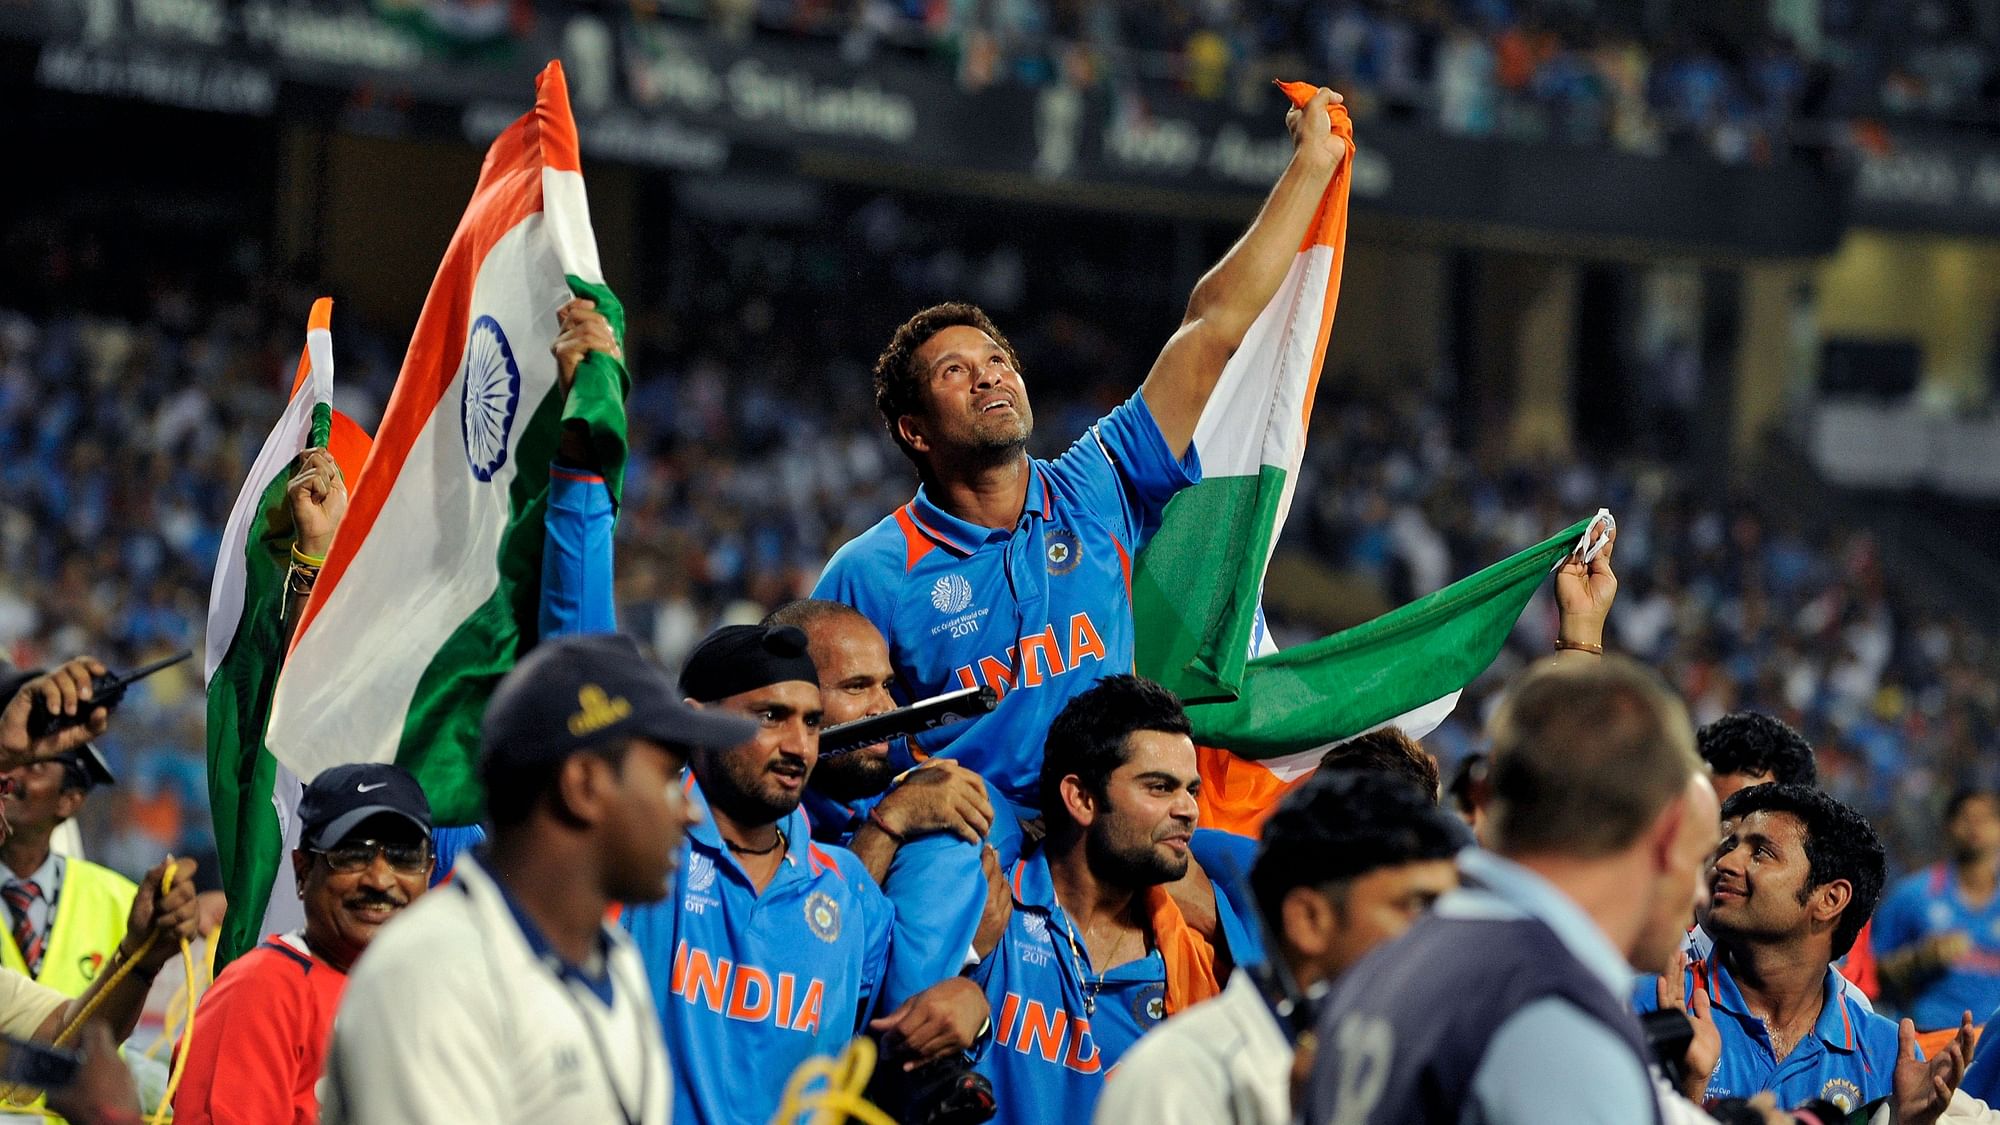 A look at how India came to love cricket.